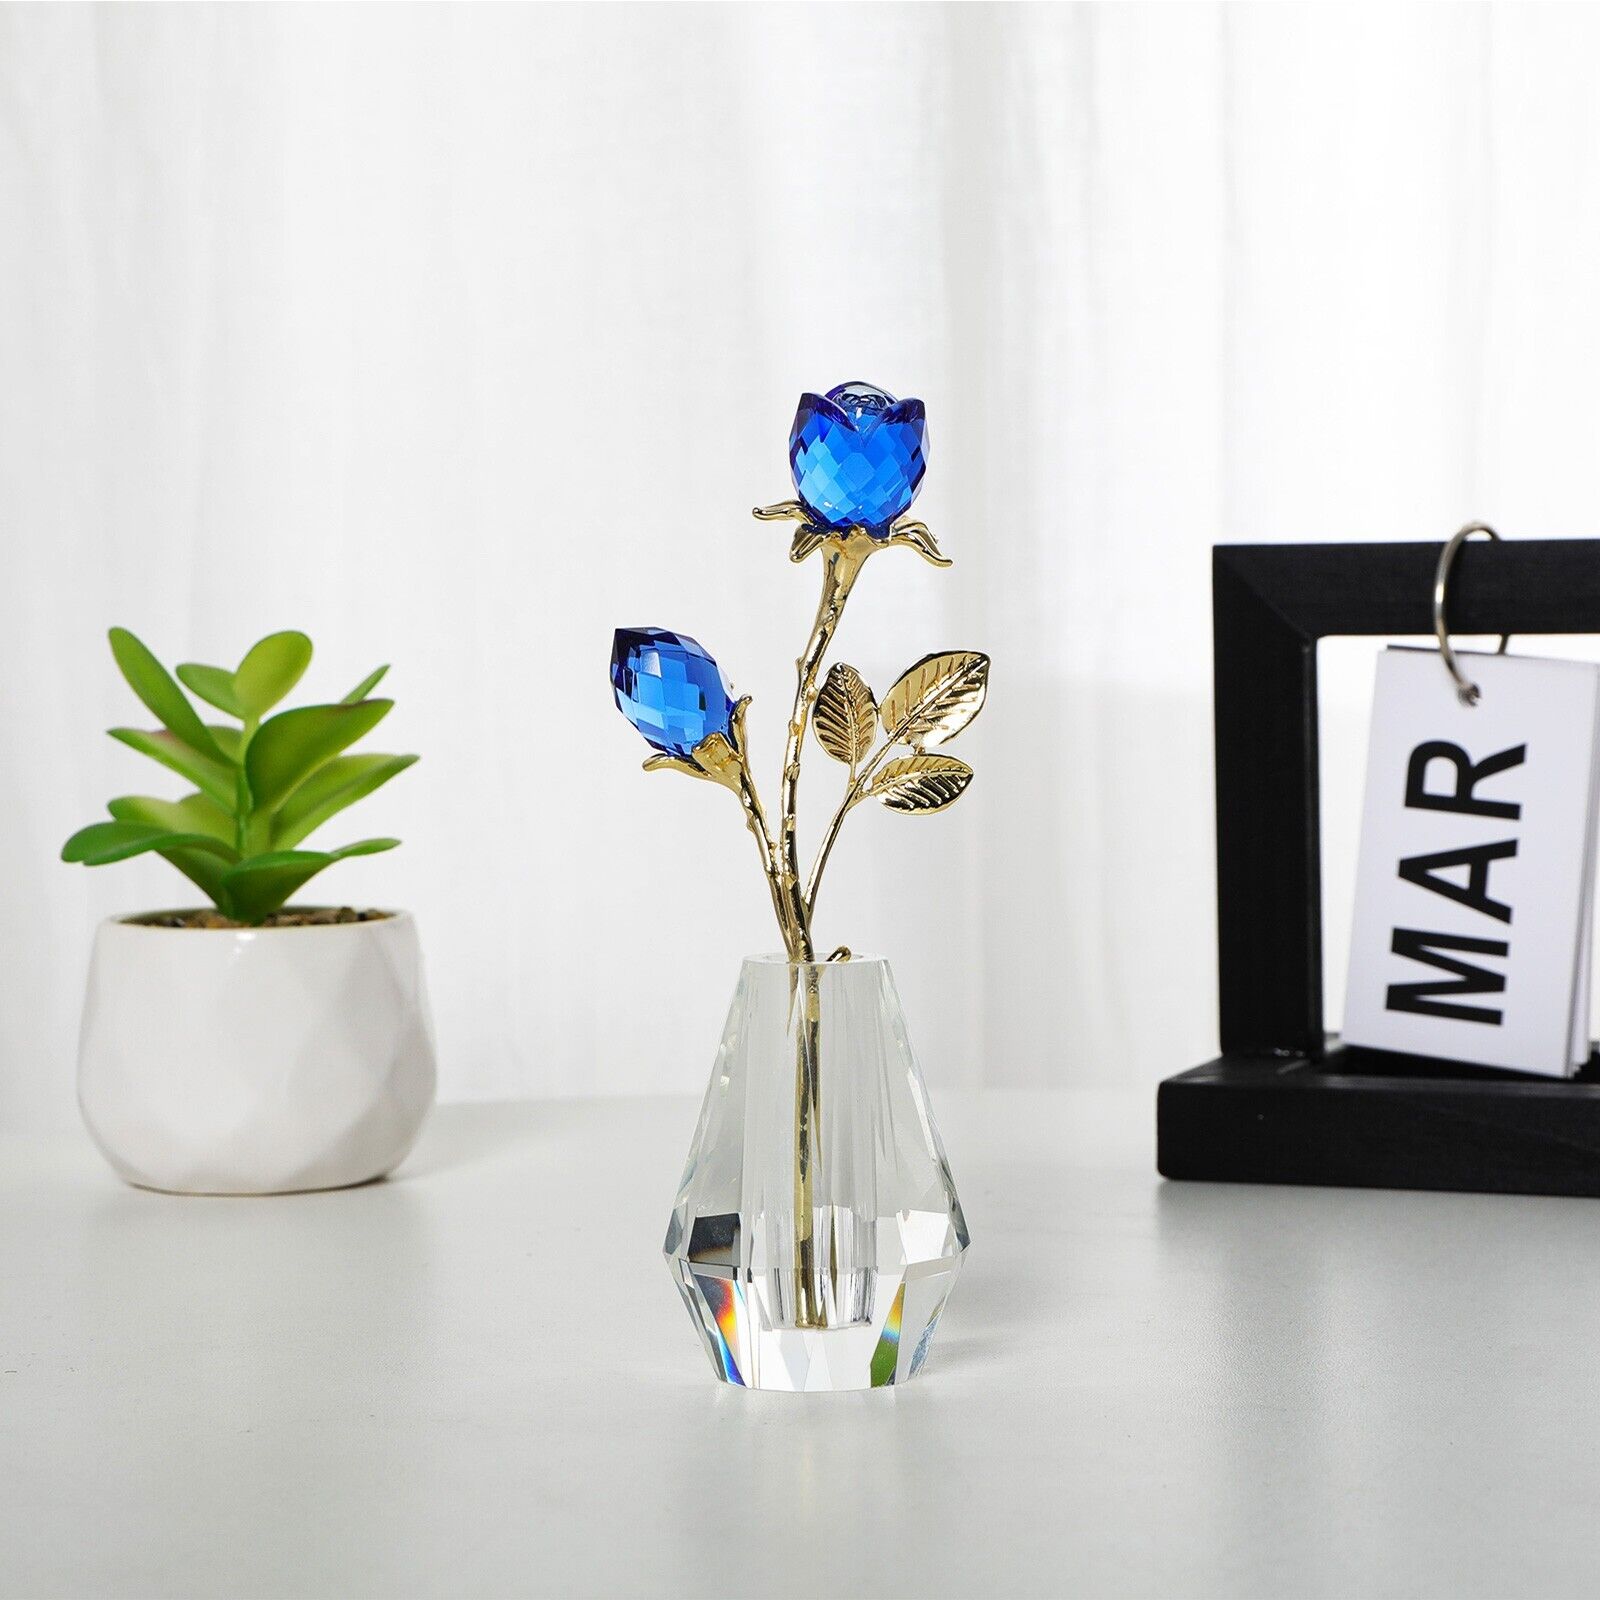 Crystal Rose Flower Figurine with Vase Handmade Blue Rose Flower Gifts for Woman